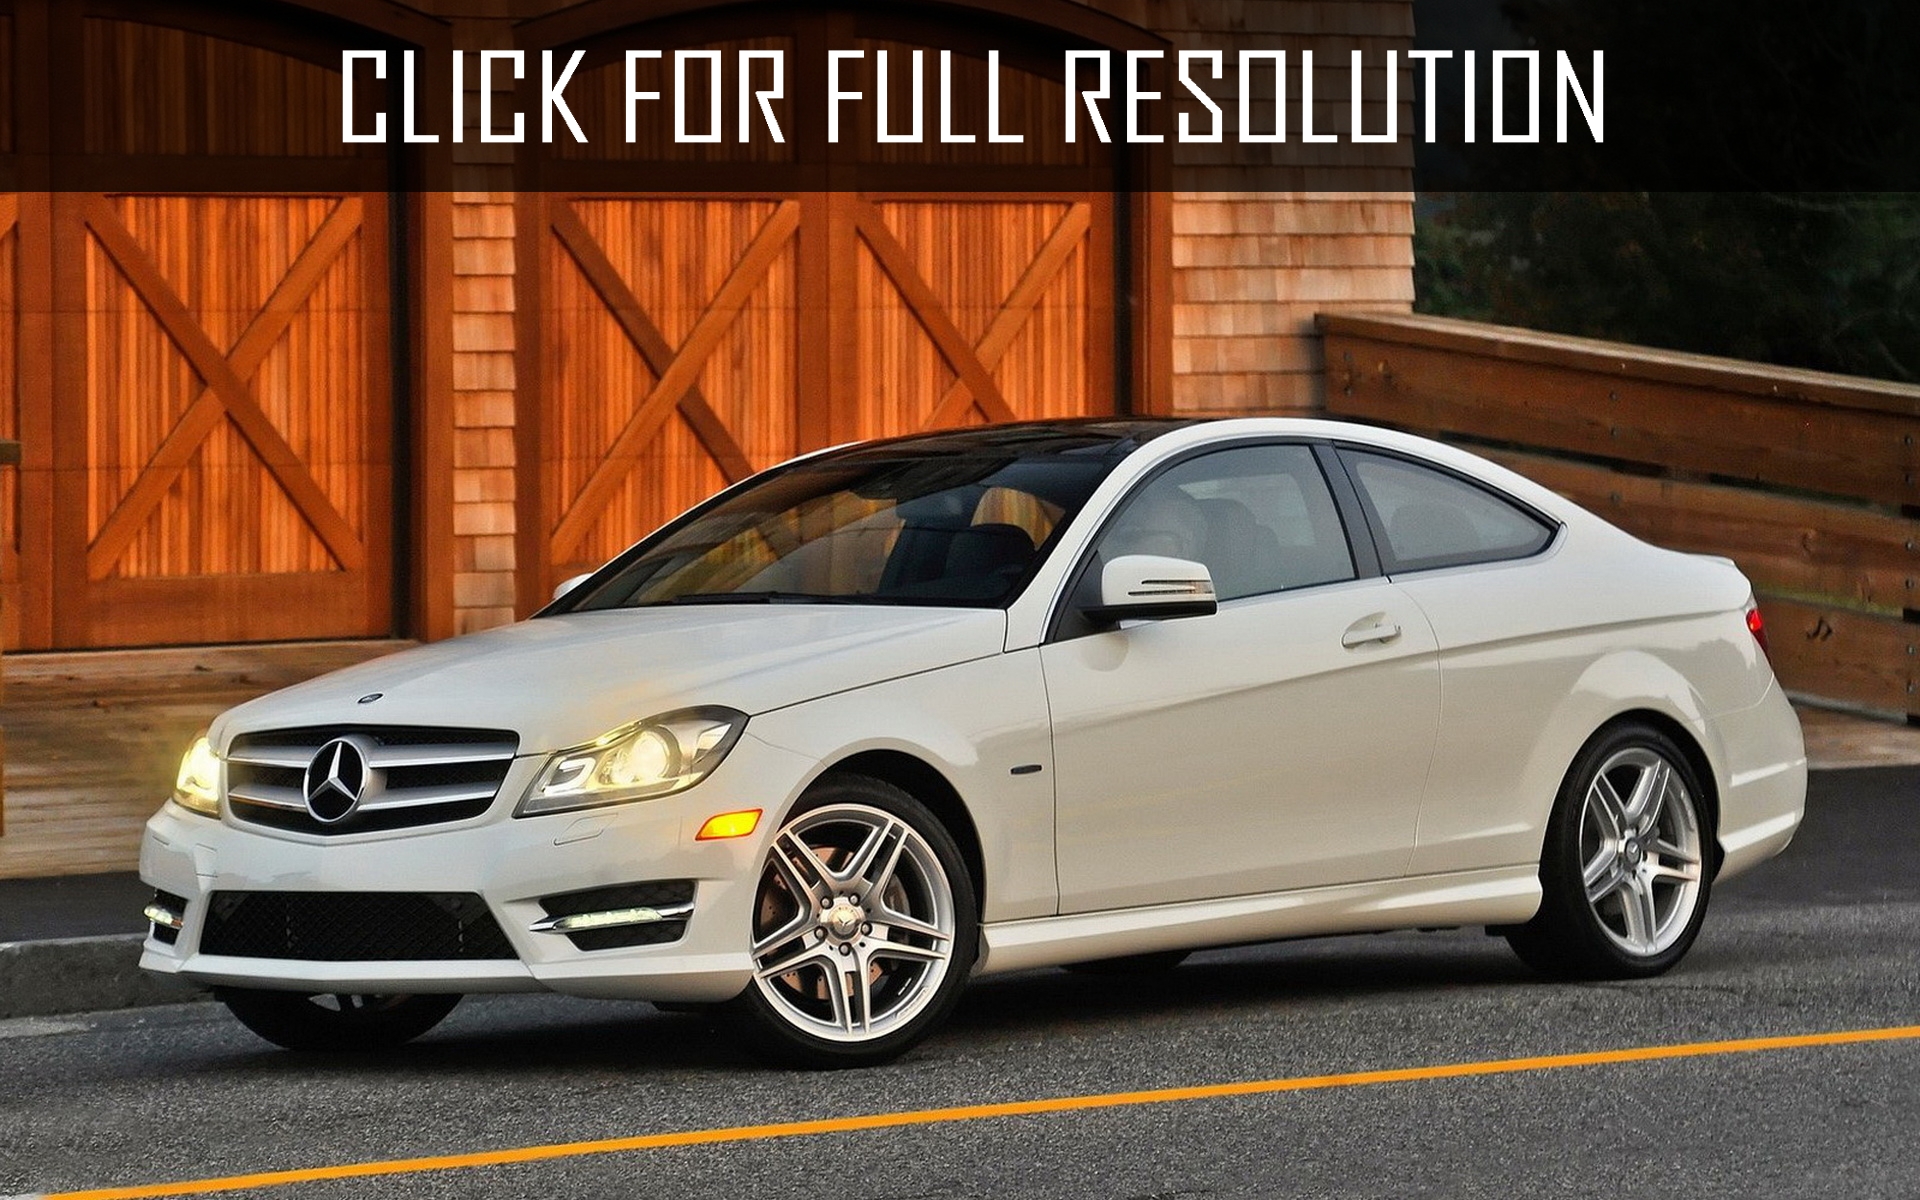 11 Mercedes Benz C Class Coupe Best Image Gallery 13 Share And Download